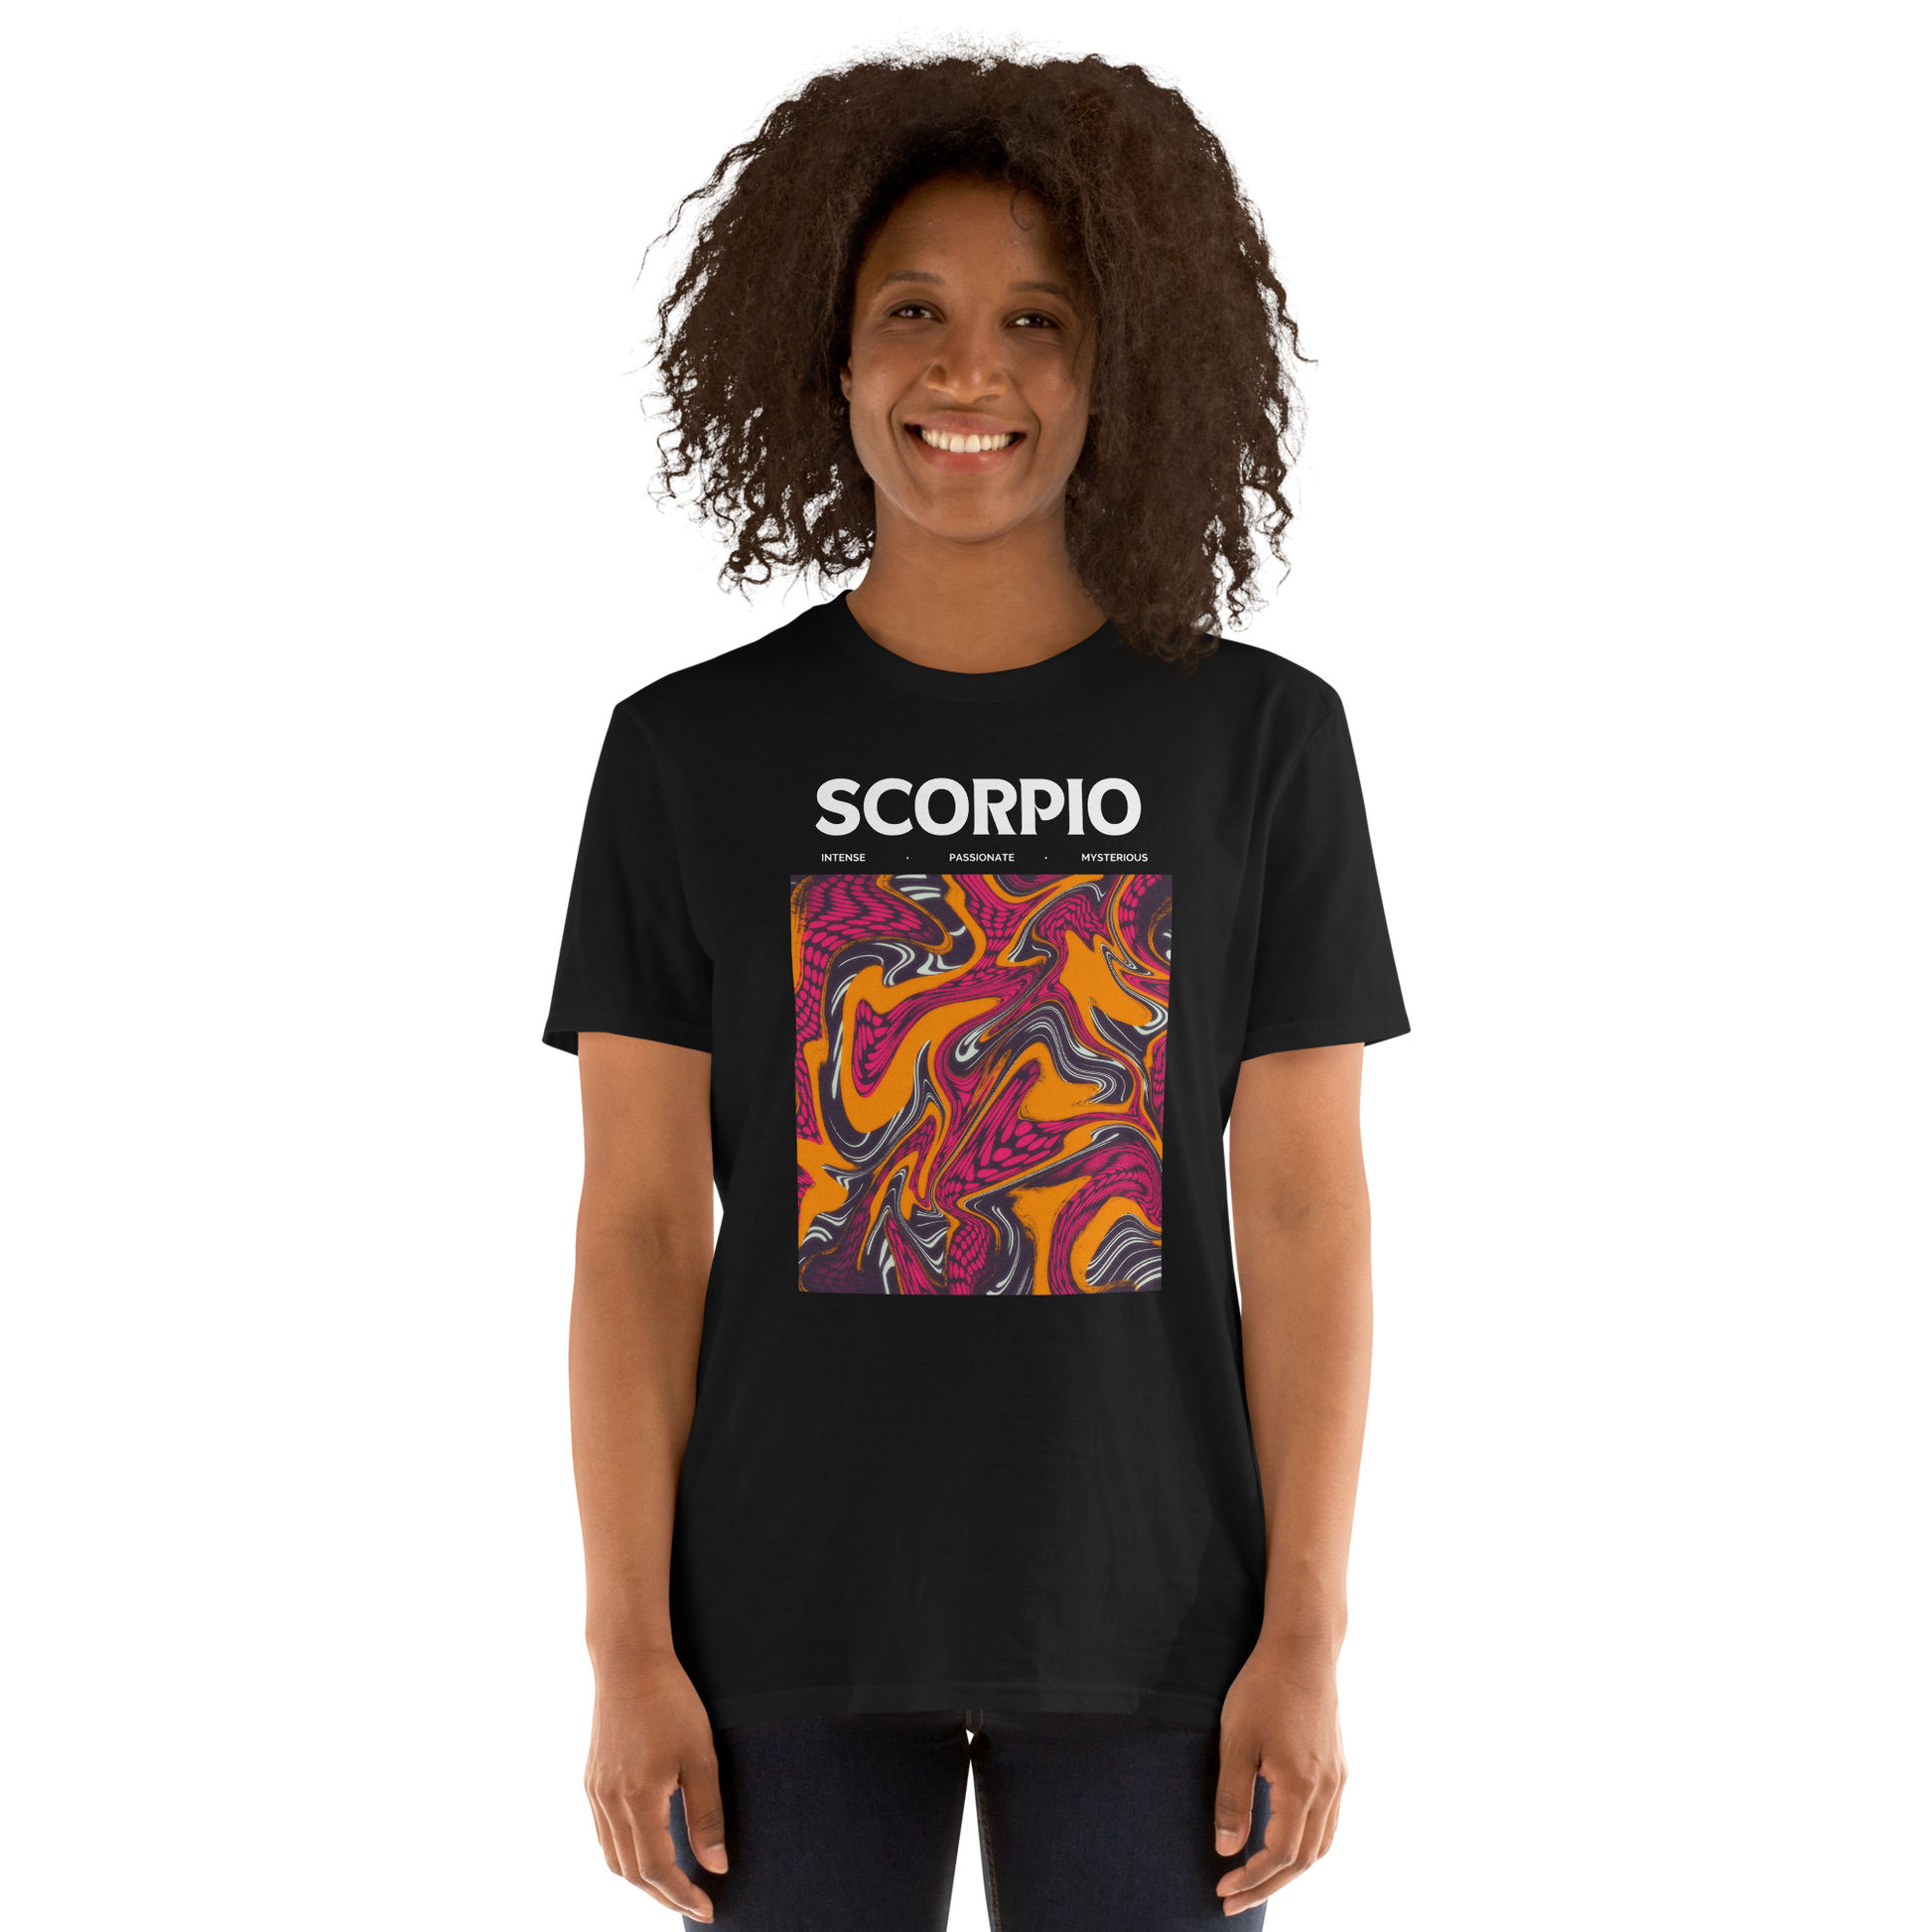 Smiling woman wearing a Black Scorpio T-Shirt featuring an Abstract Scorpio Star Sign graphic on the chest - Cool Graphic Zodiac T-Shirts - Boozy Fox